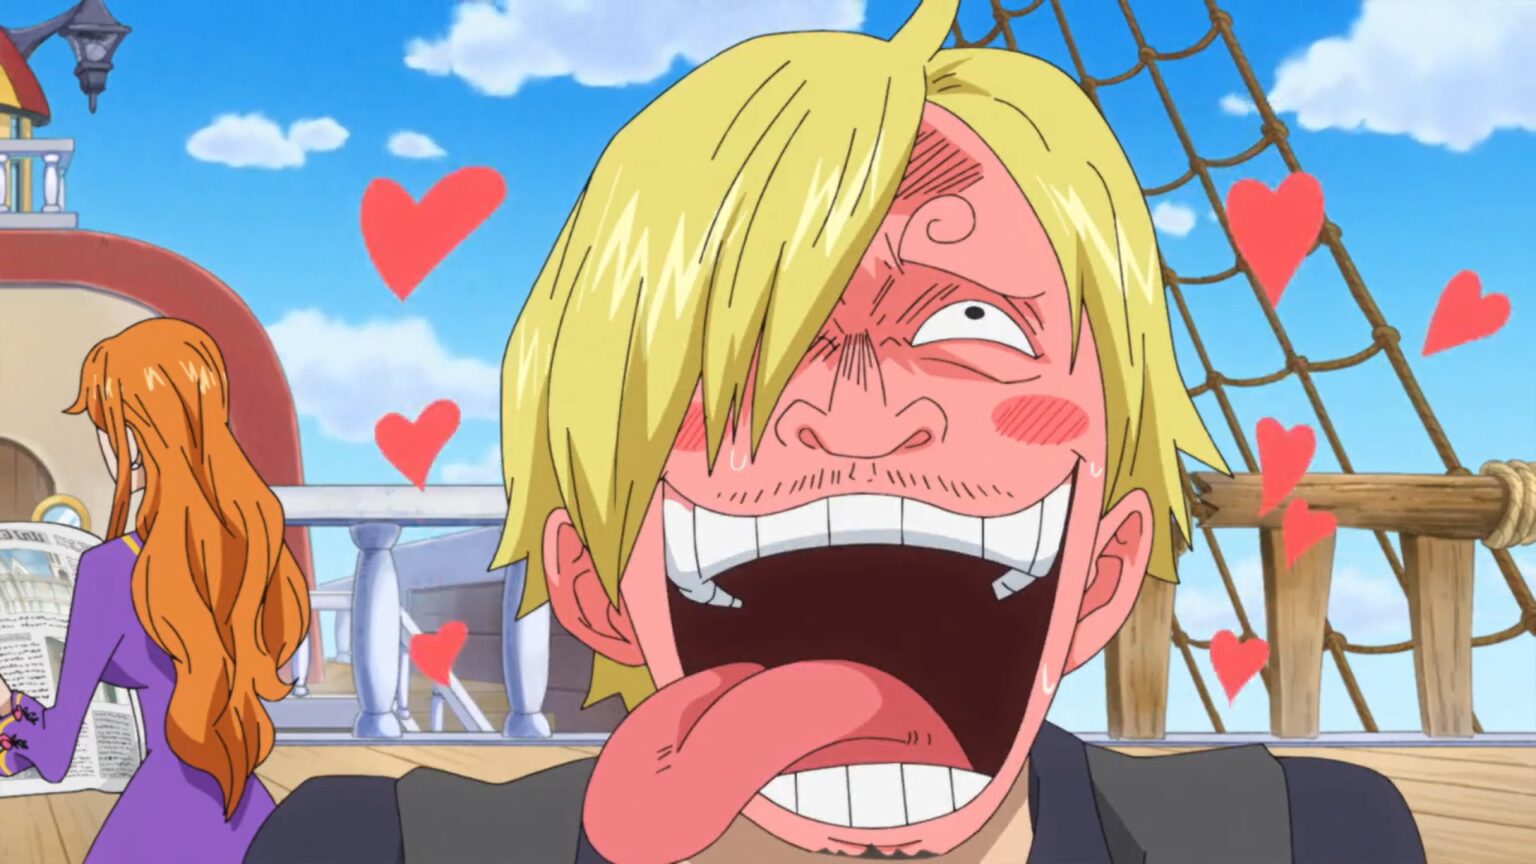 One Piece 879 Sanji Blushing at the picture of Vivi.